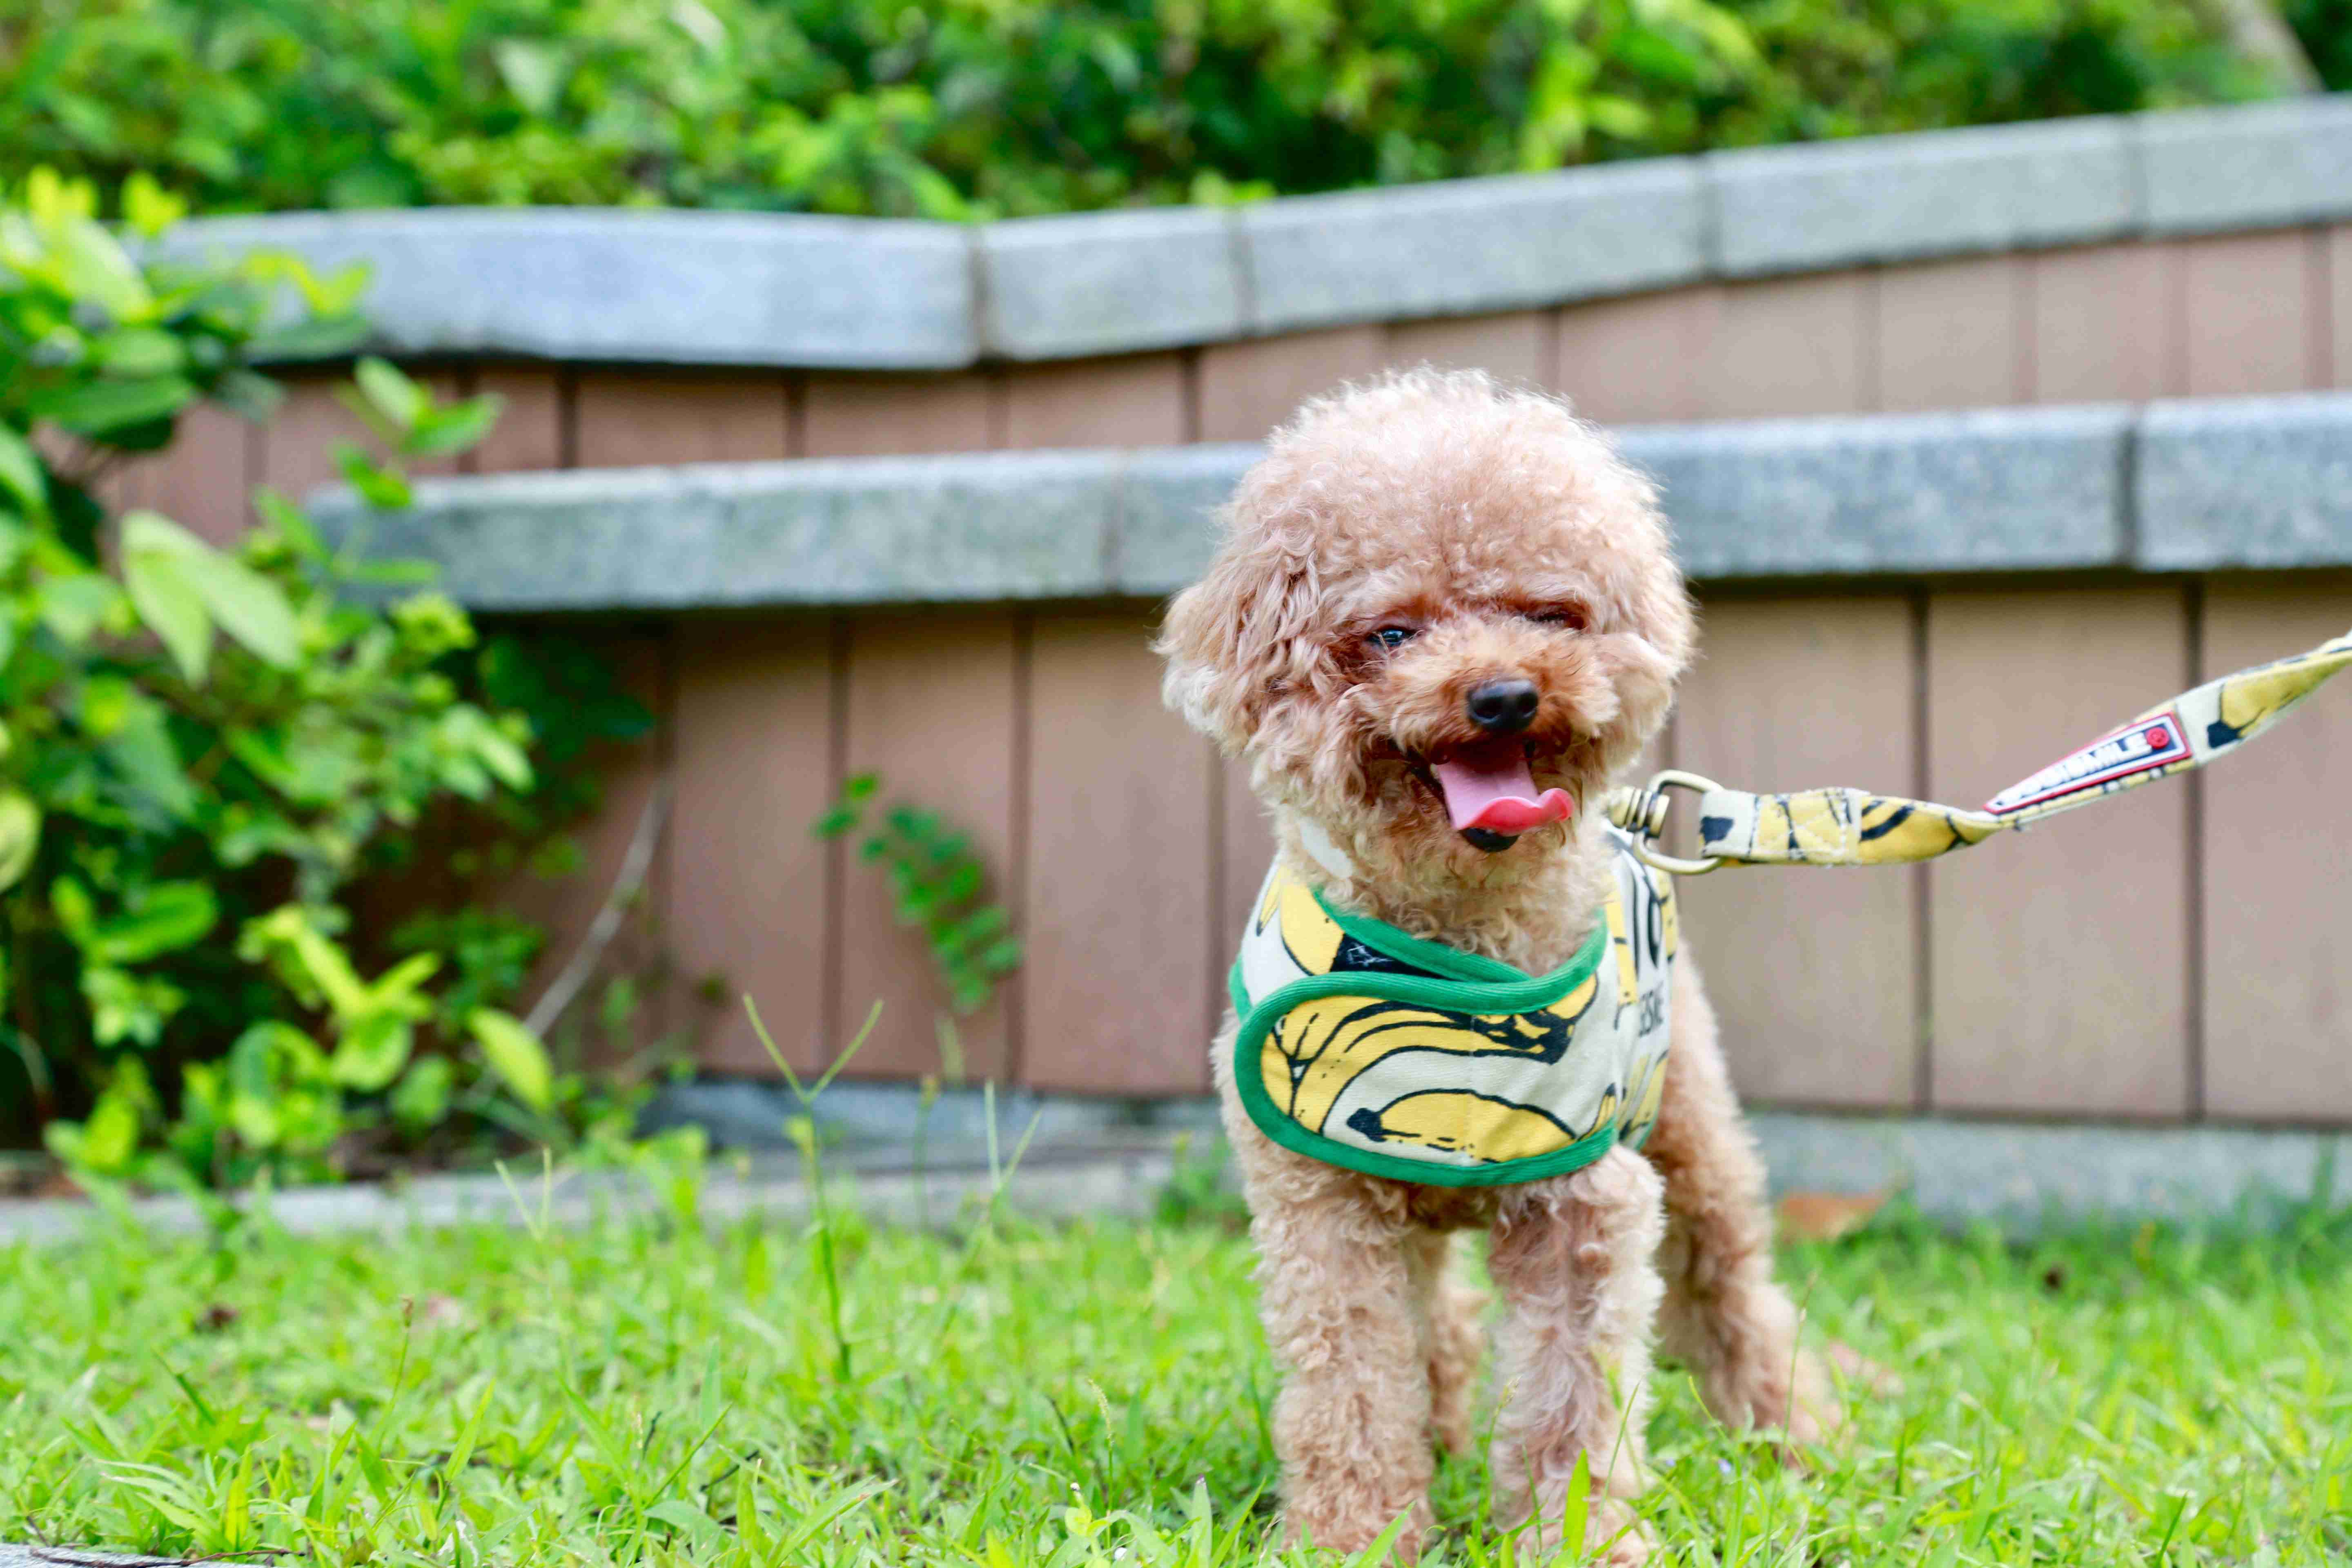 Did you encounter any challenges with teaching your Poodle puppy proper leash manners?